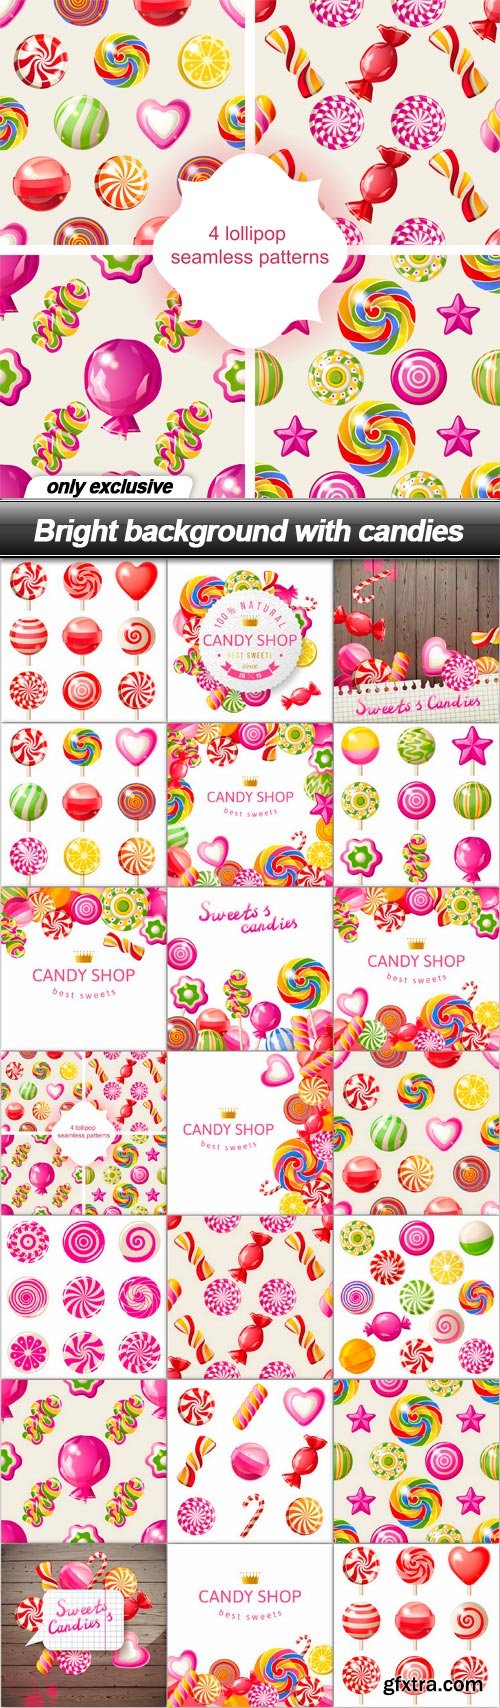 Bright background with candies - 20 EPS